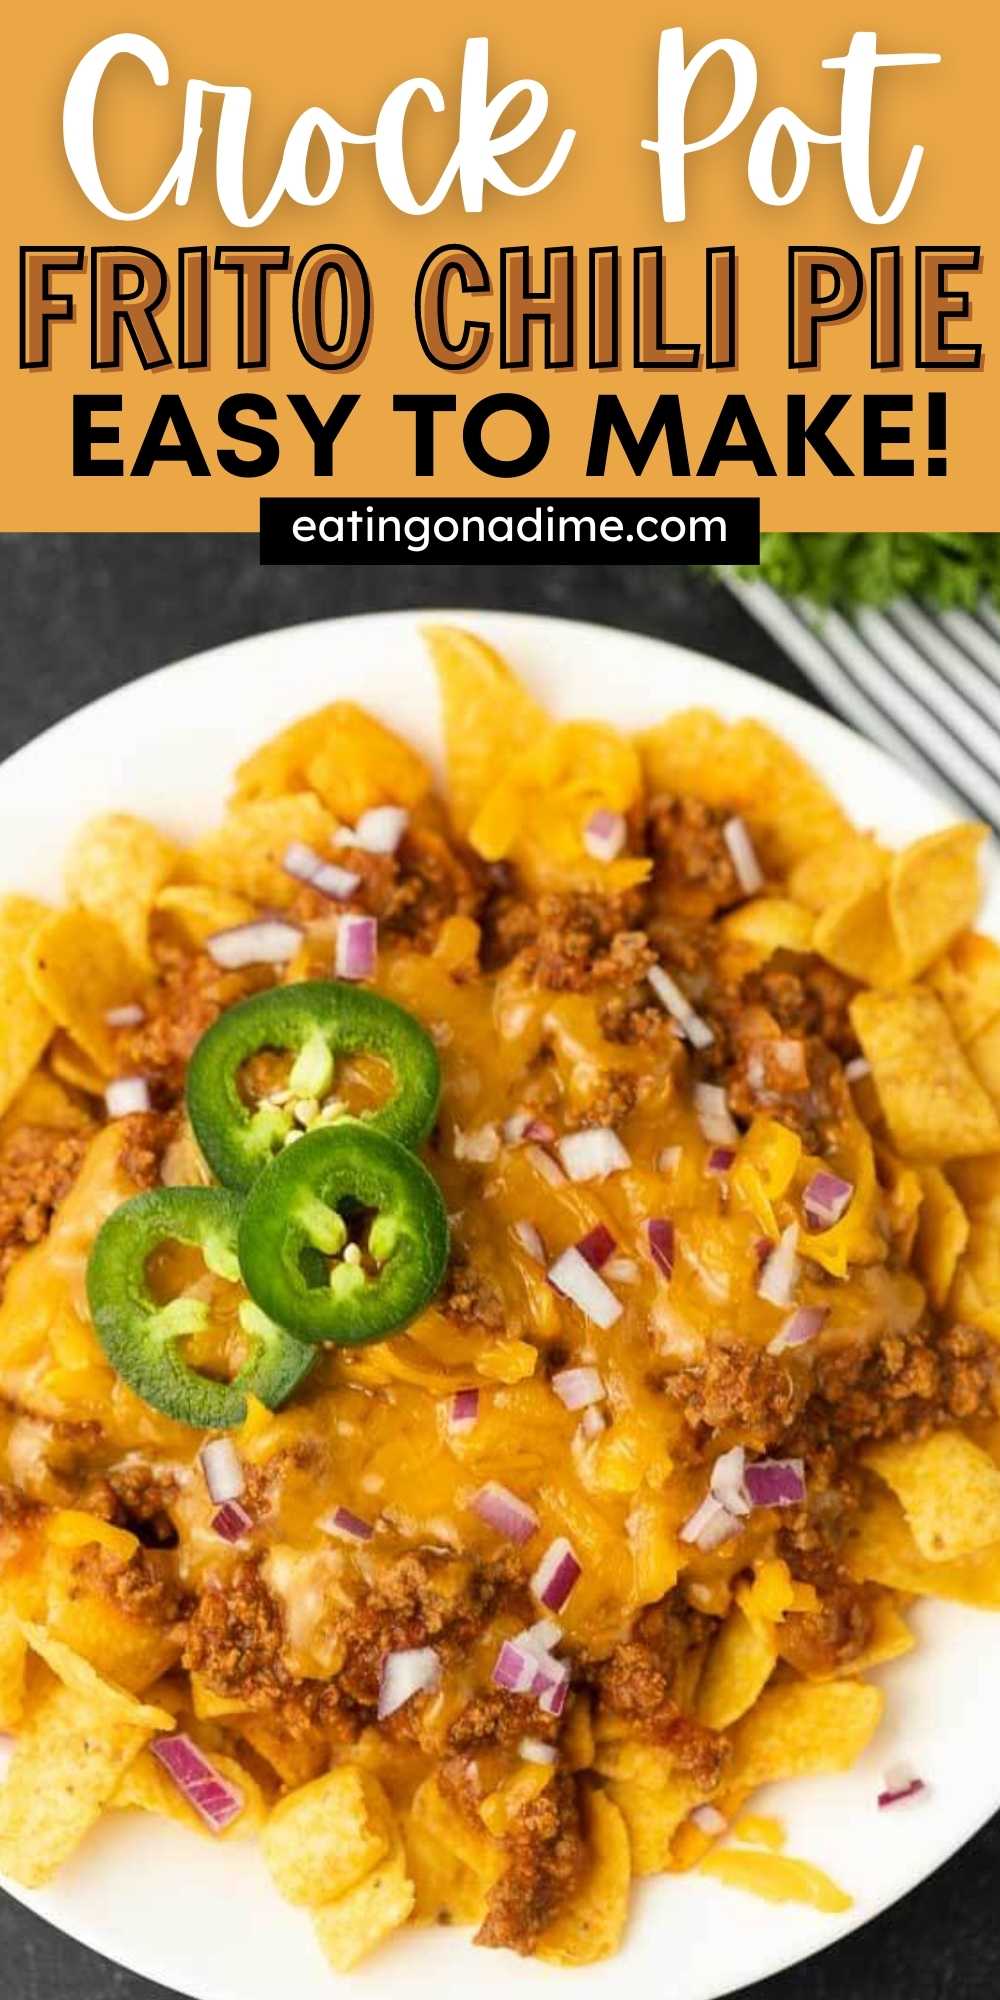 From Game Day to family dinner, Crock Pot Frito Chili Pie Recipe is versatile and delicious. Try this easy Slow Cooker Frito Pie recipe to feed a crowd. You are going to love this simple to make crockpot Frito chili pie recipe.  #eatingonadime #crockpotrecipes #beefrecipes #slowcookerrecipes 
